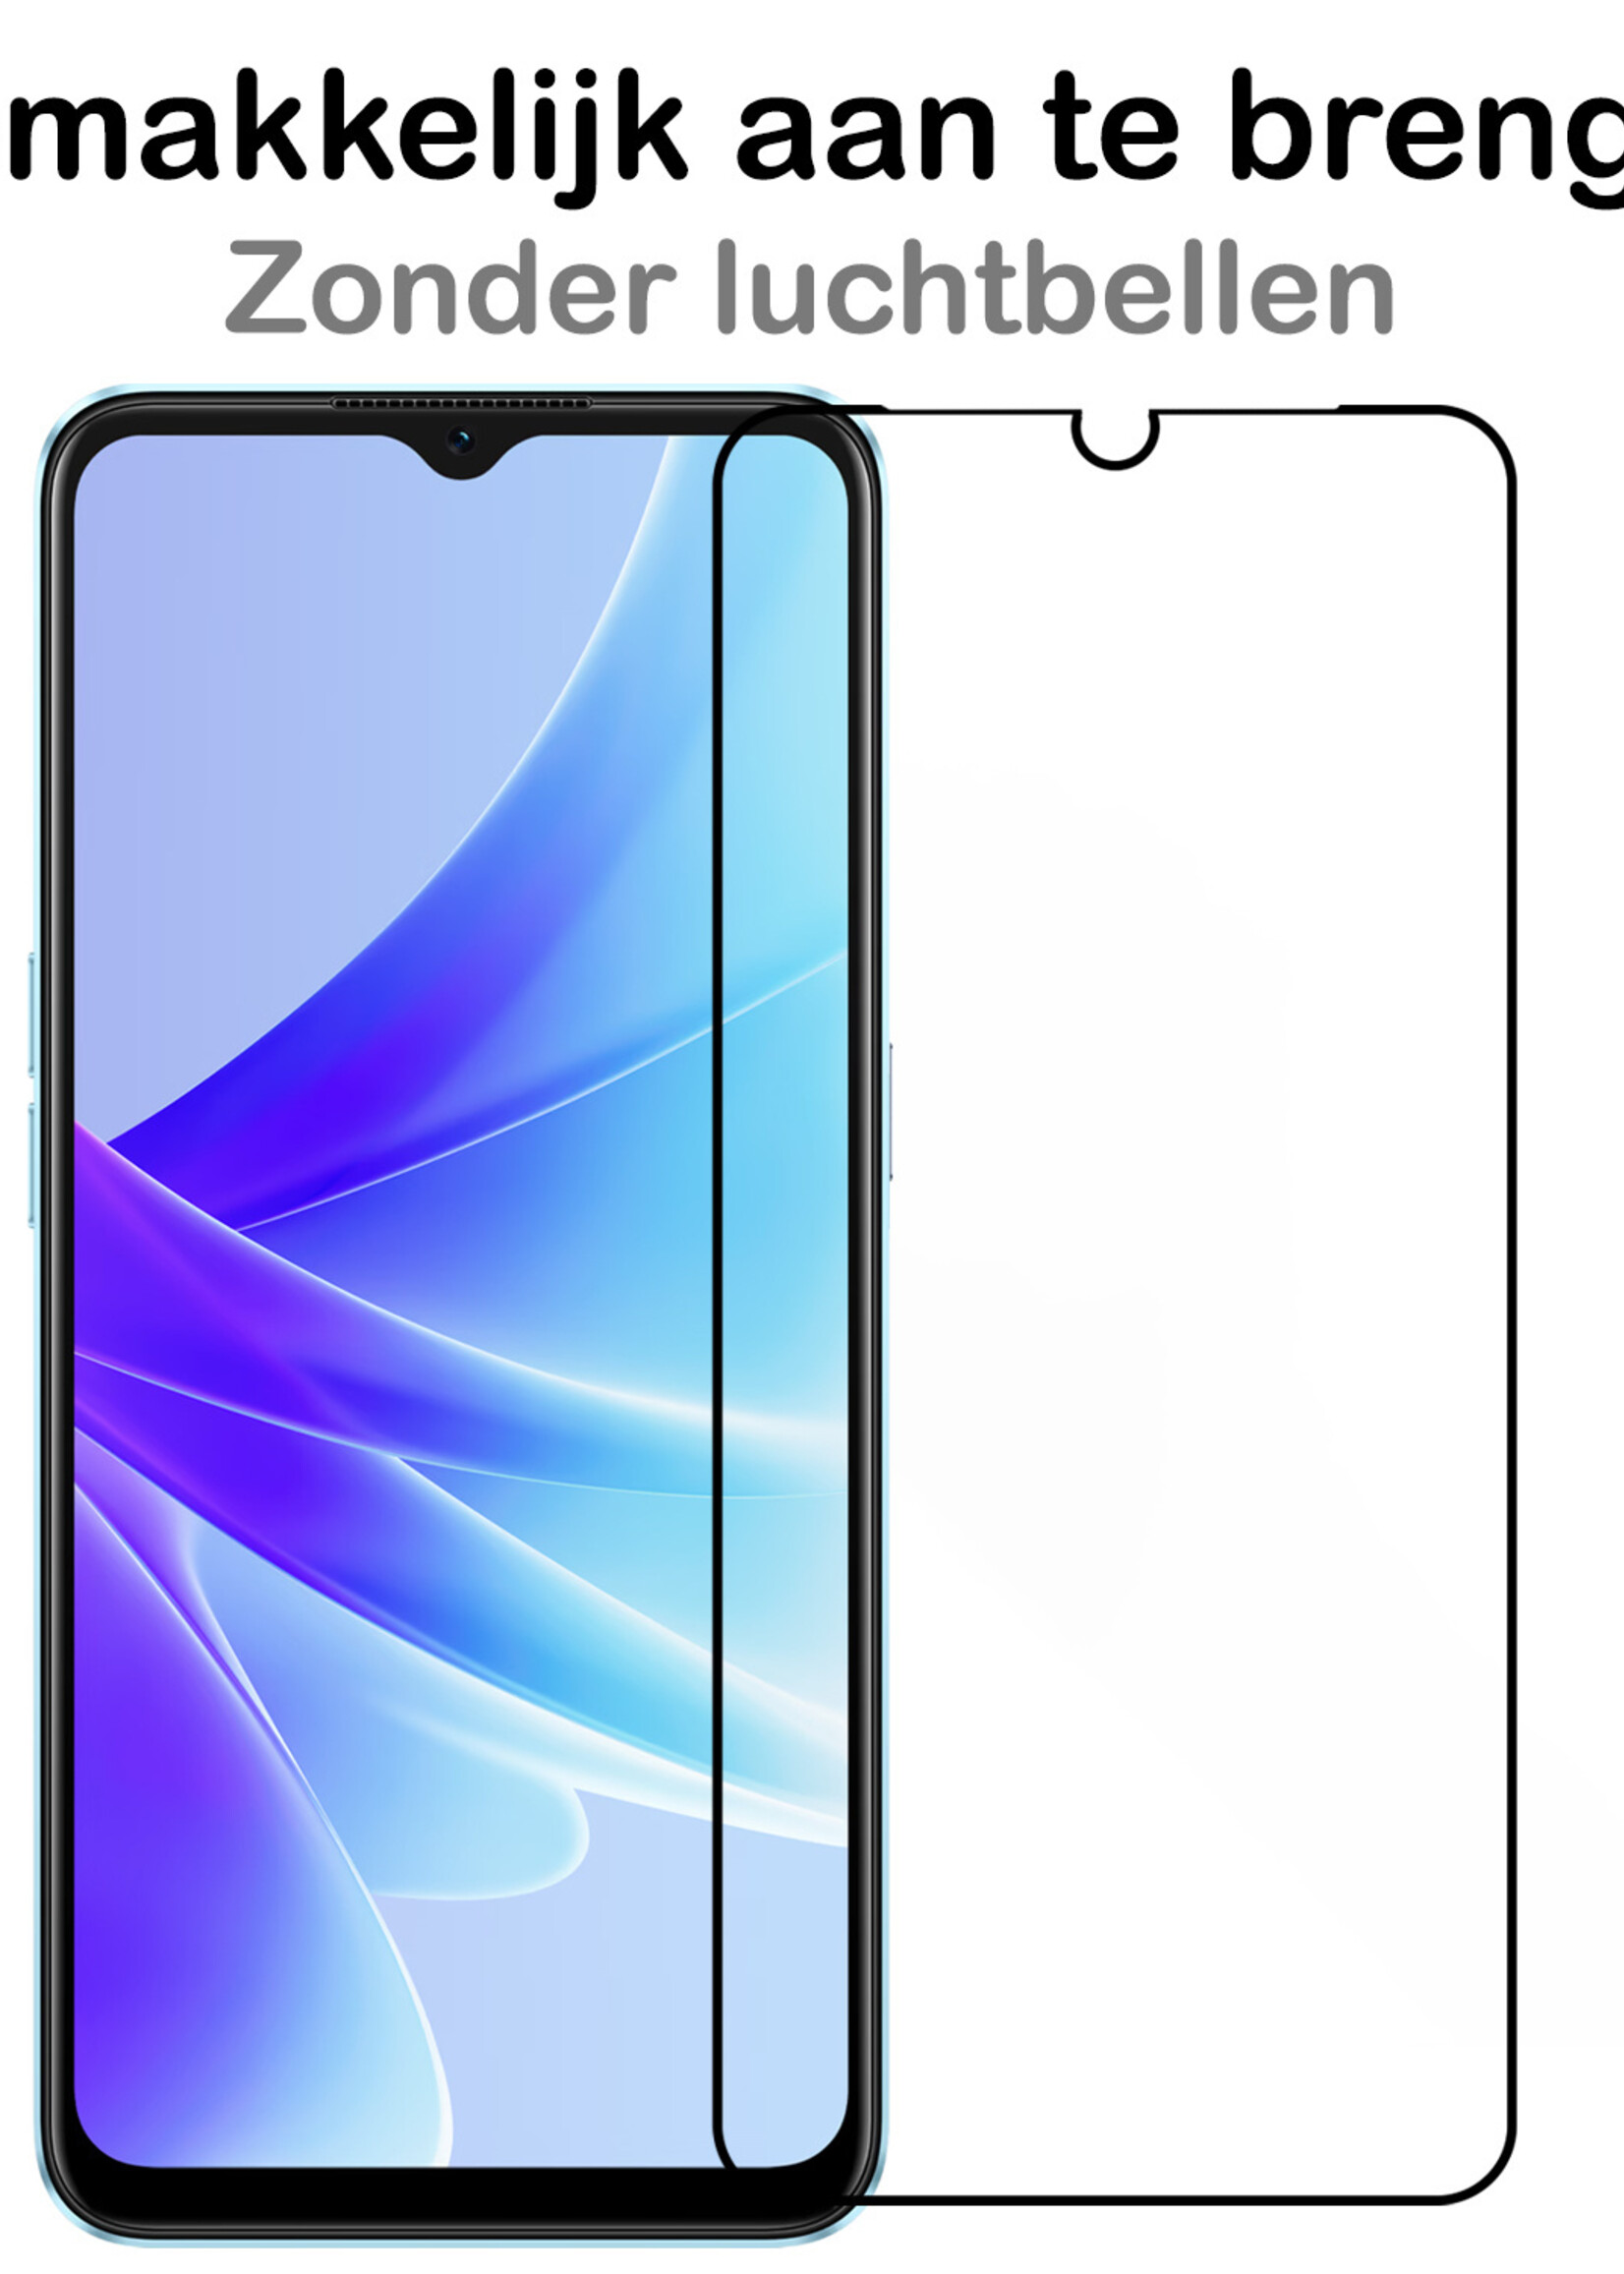 BTH Screenprotector Geschikt voor OPPO A57 Screenprotector Glas Gehard Tempered Glass Full Cover - Screenprotector Geschikt voor OPPO A57 Screen Protector Screen Cover - 3 PACK